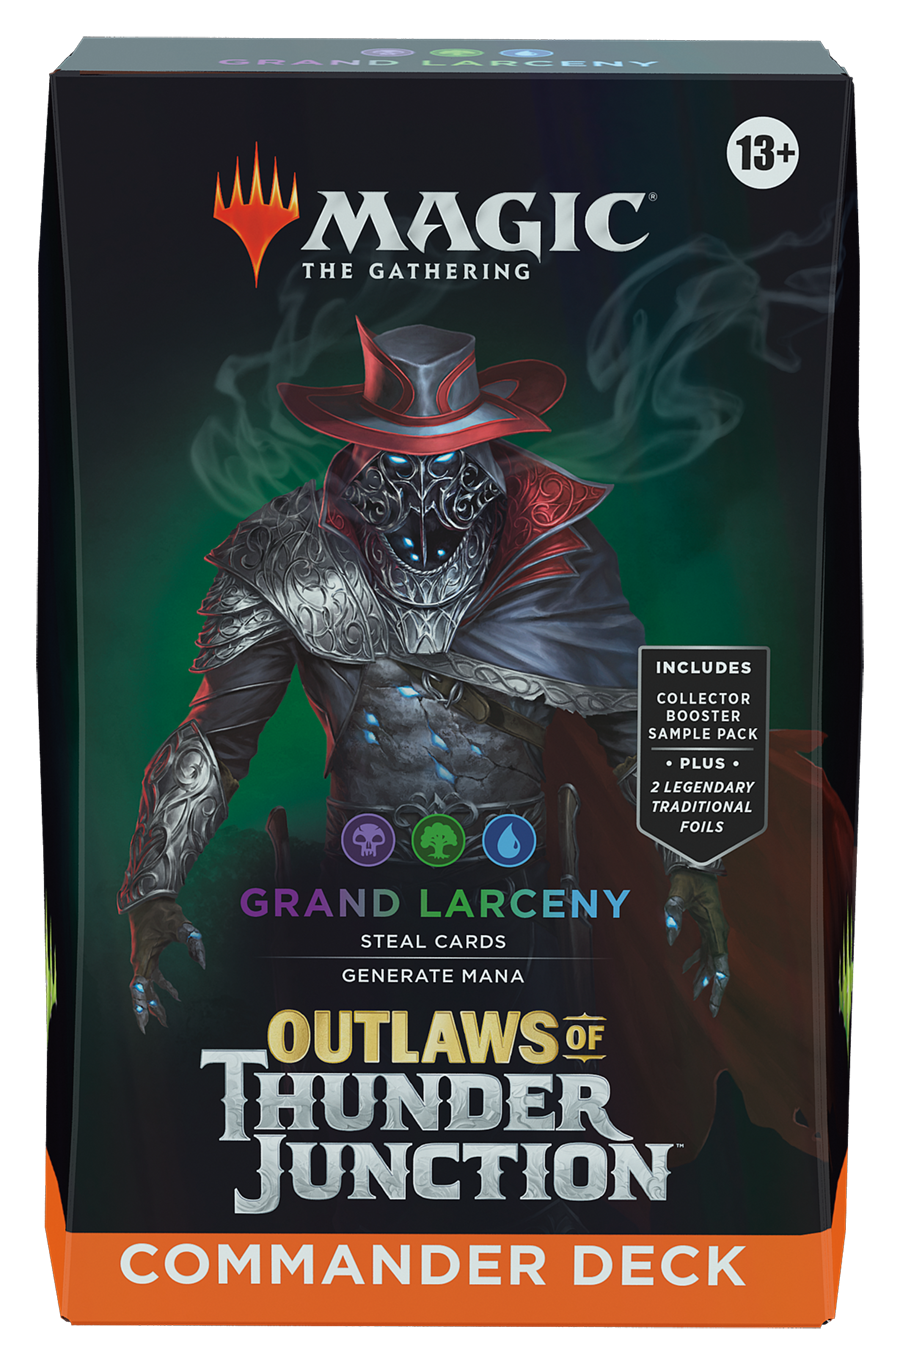 Magic the Gathering - Outlaws of Thunder Junction - Grand Larceny Commander Deck